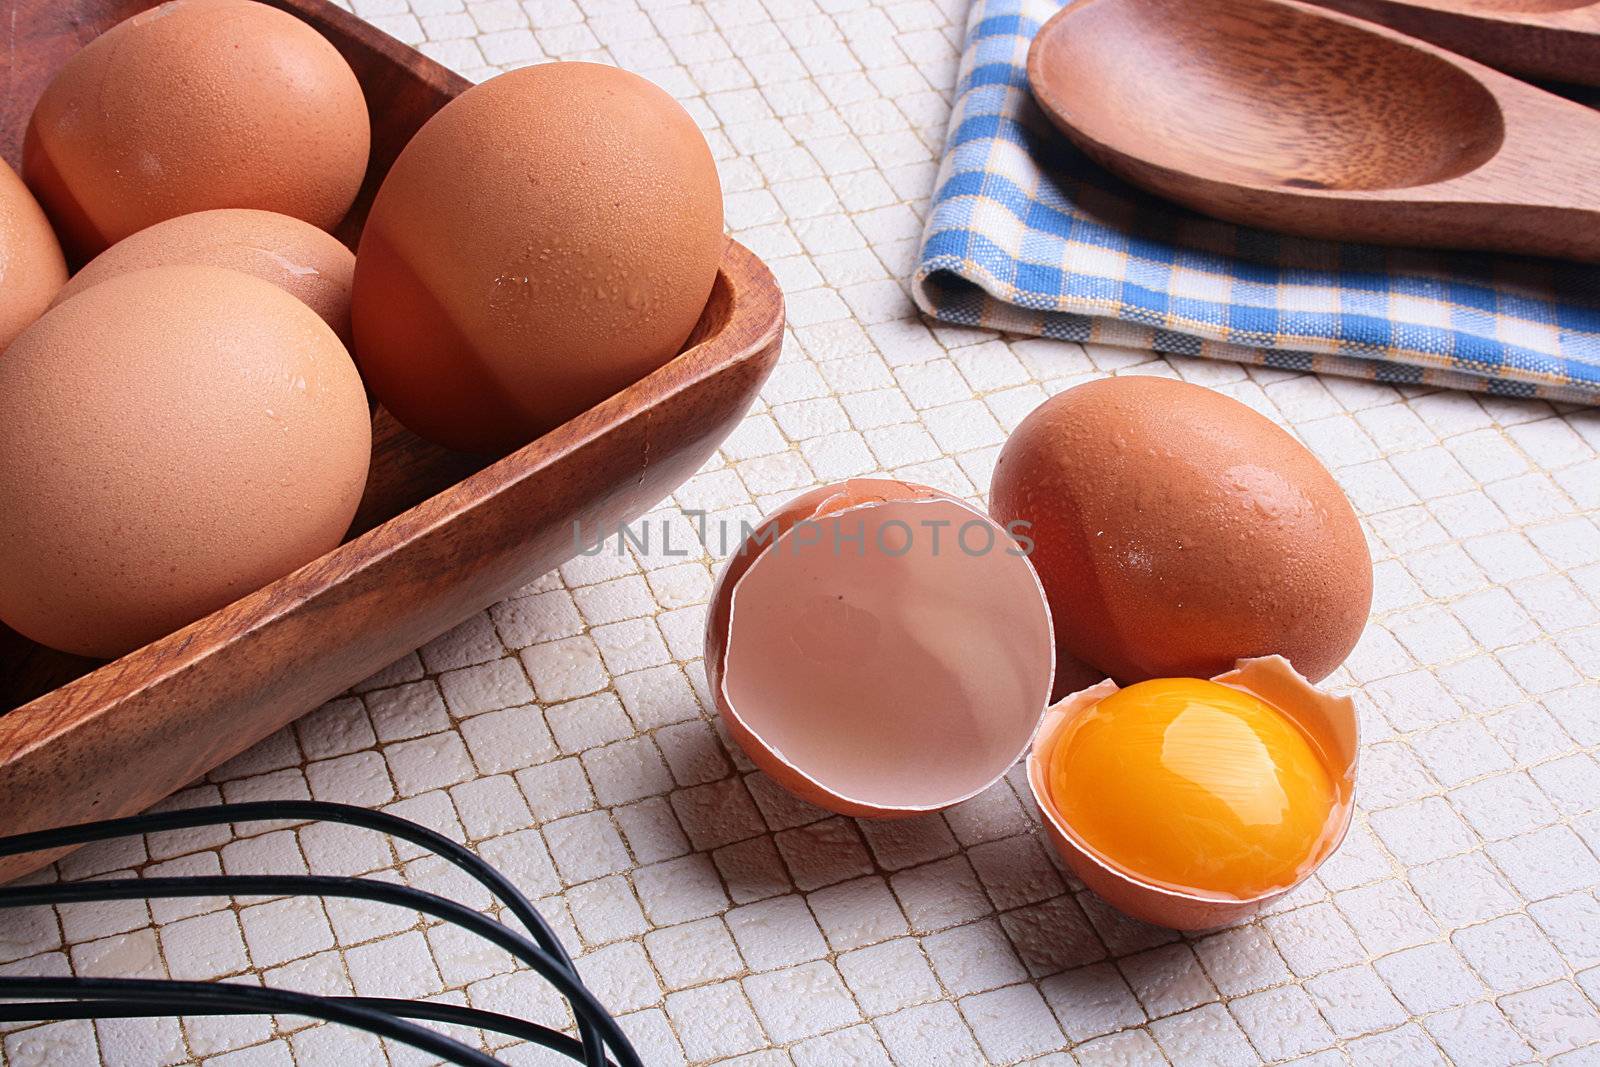 One of components of culinary recipes - the eggs, one of eggs is split and in a shell there is a yolk.